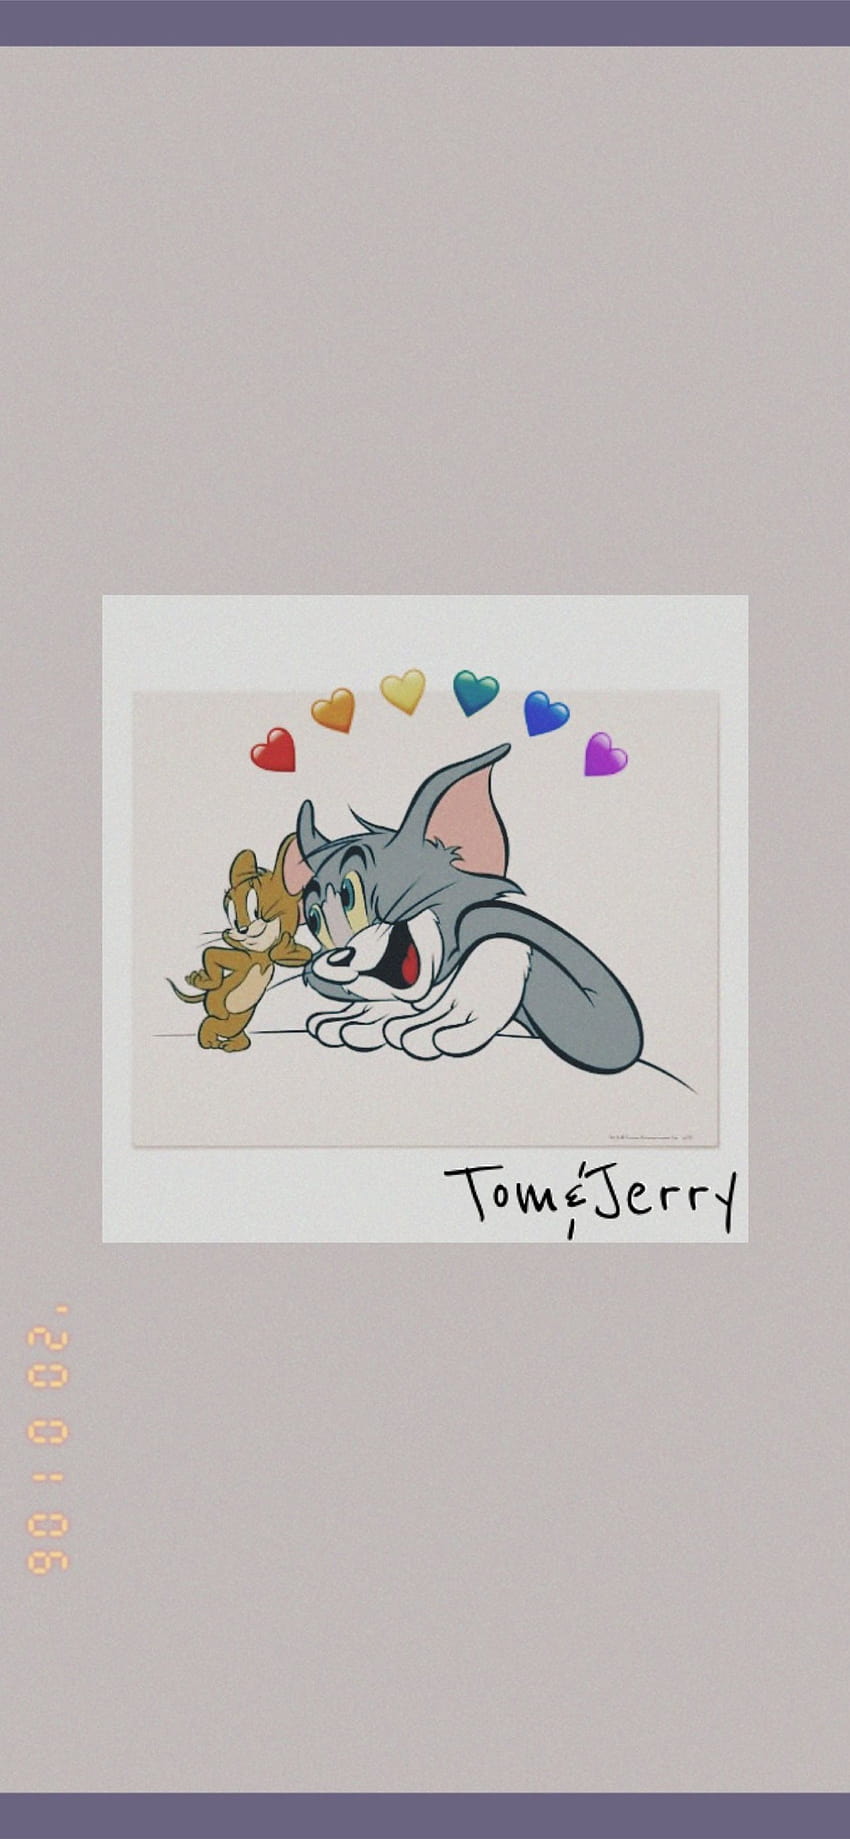 Tom Jerry in 2021 iPhone, tom and jerry iphone HD phone wallpaper